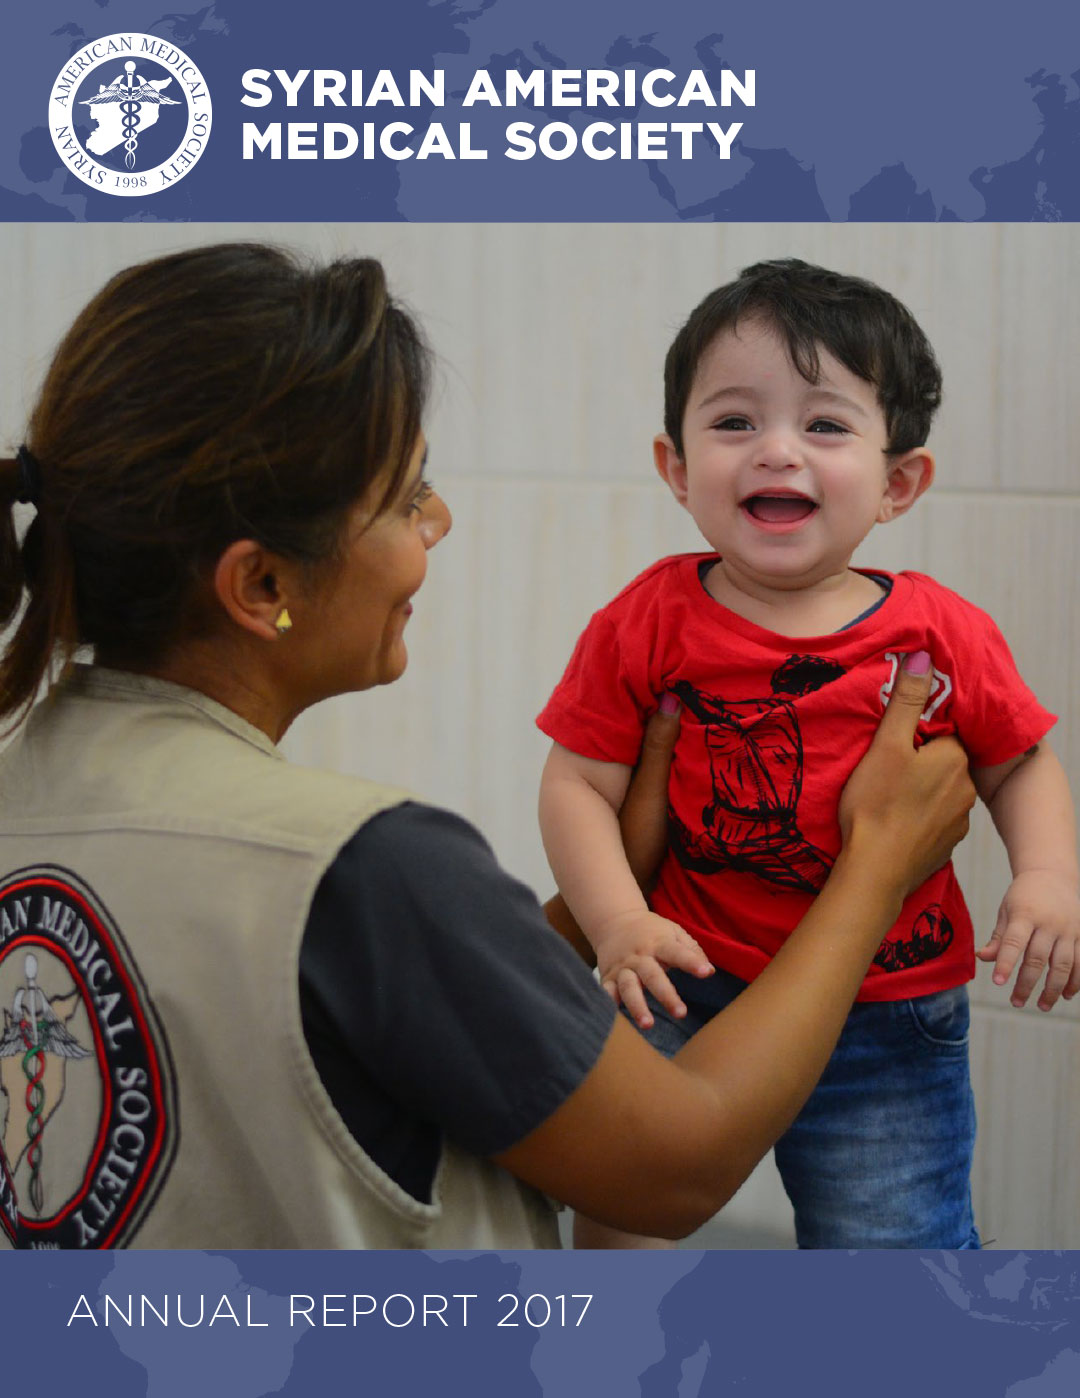 Annual report cover showing medical worker and child